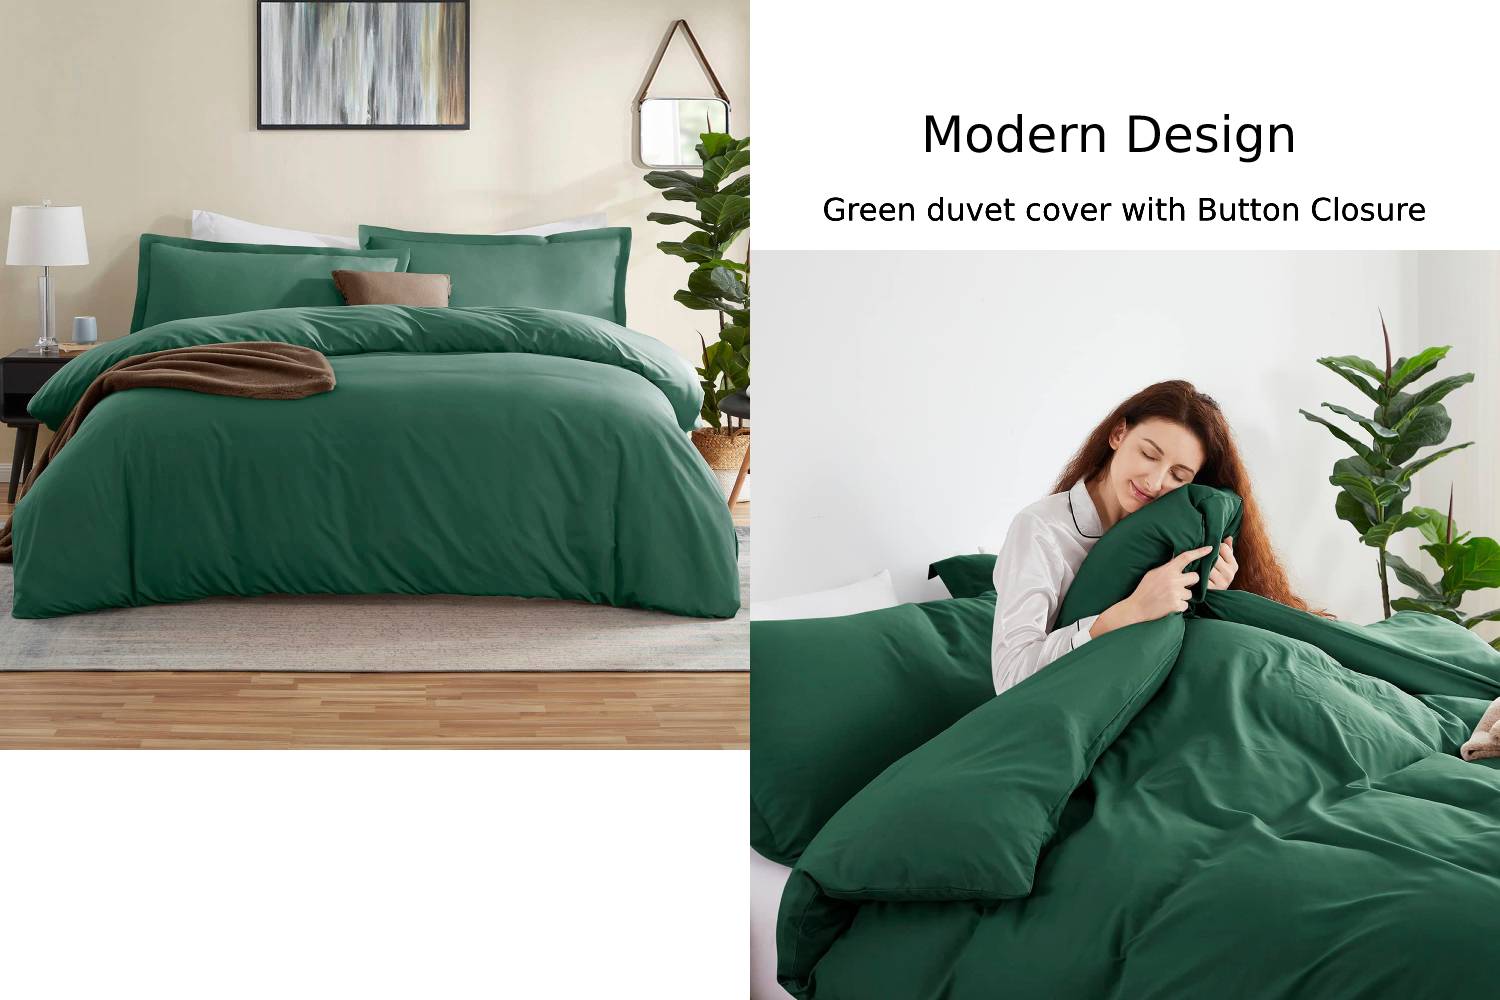 Modern Design: Green duvet cover with Button Closure